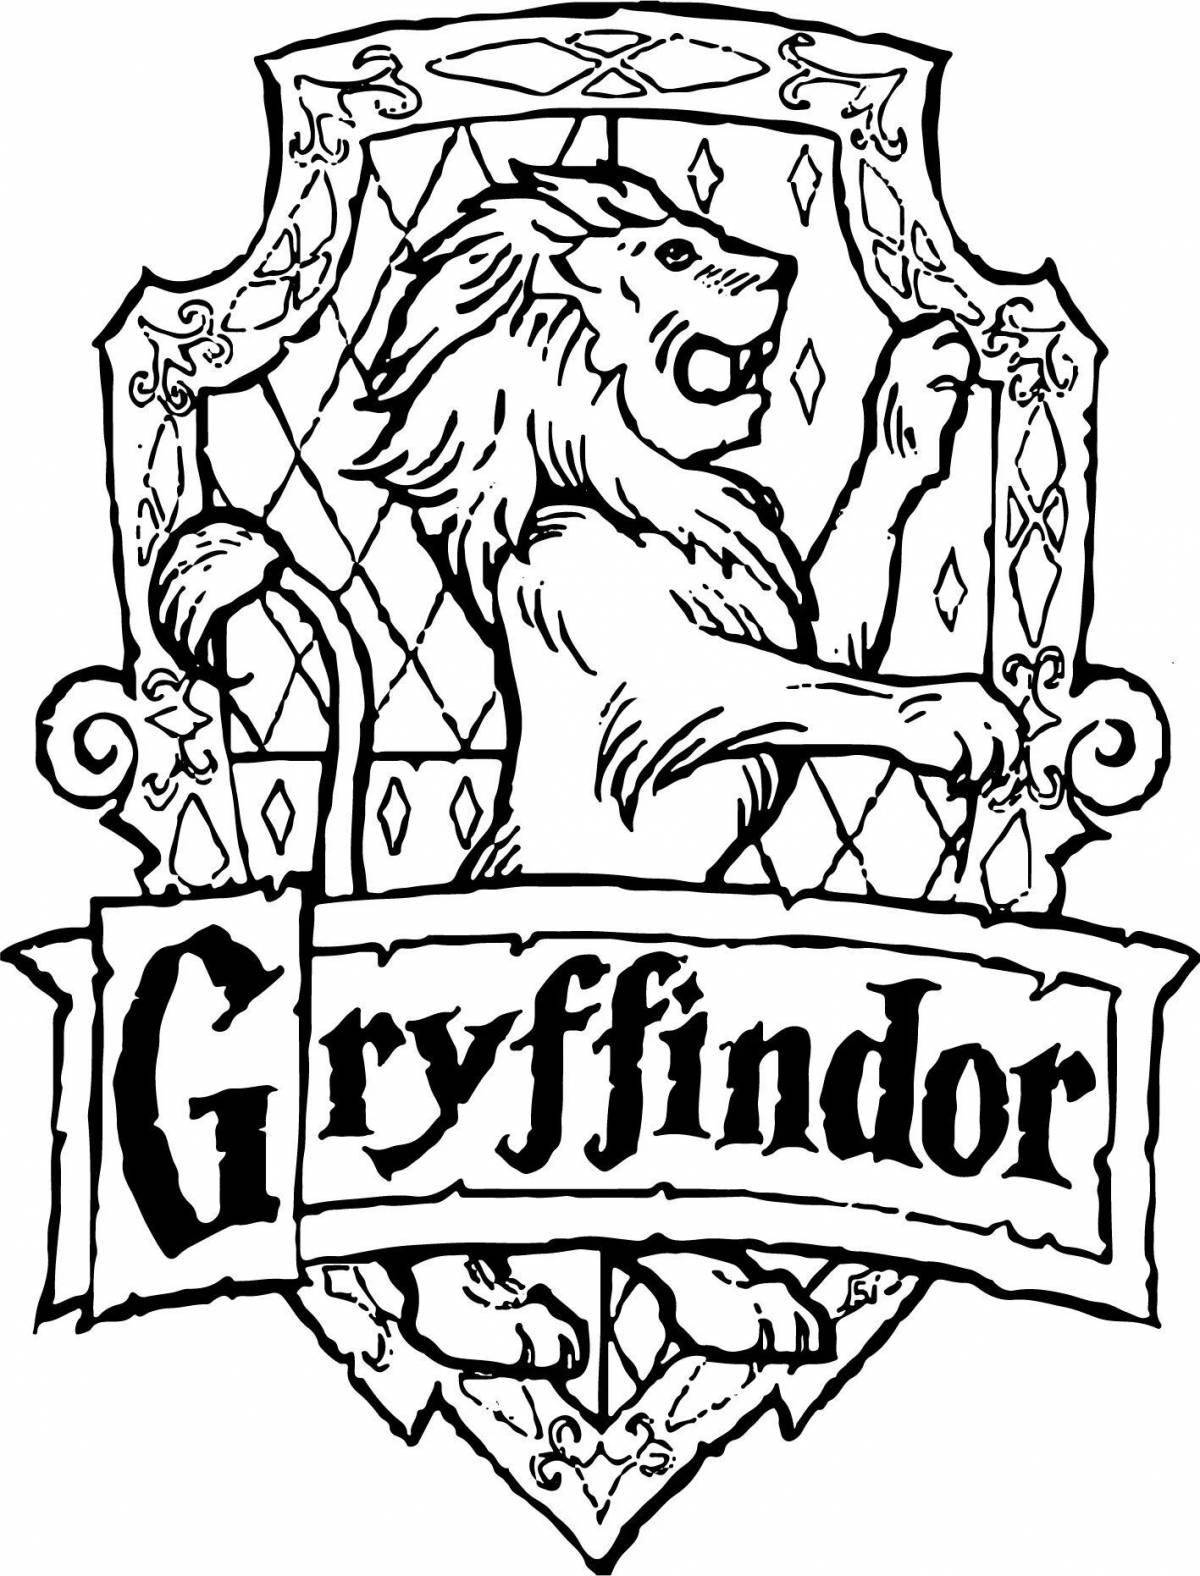 Slytherin glamourous coat of arms coloring page